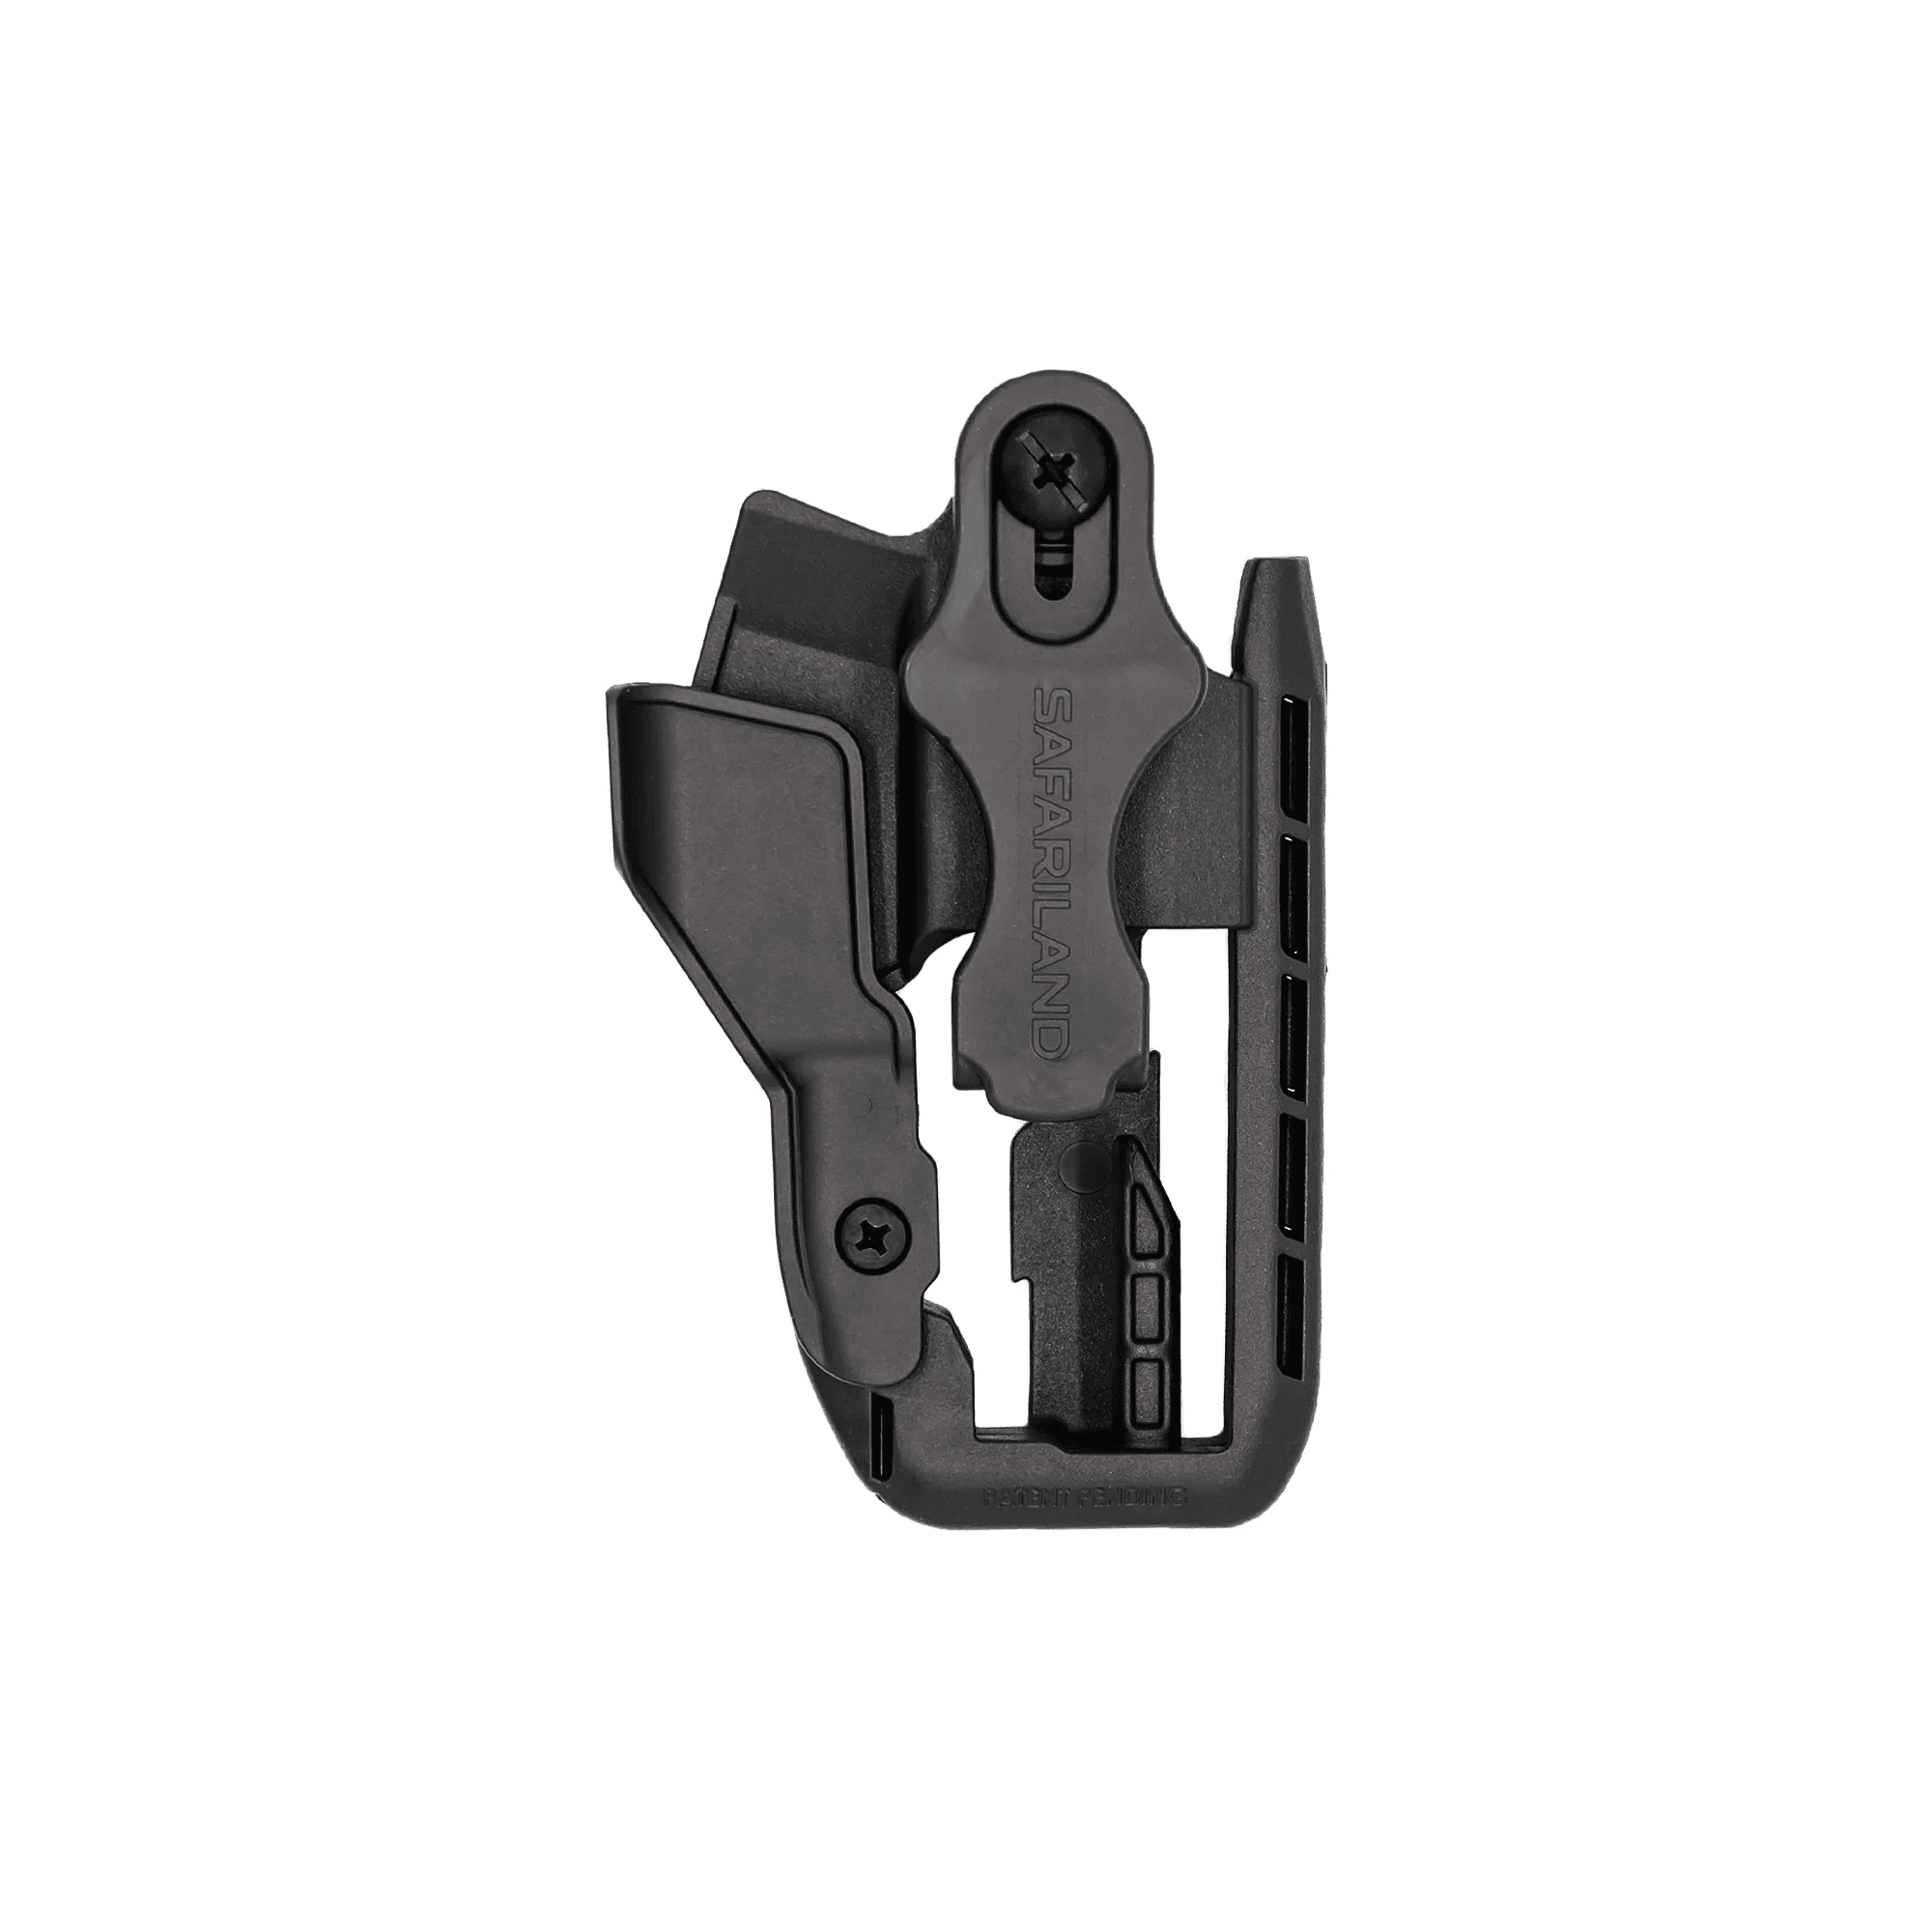 Safariland Schema IWB Holster for Glock 43/43X 1332549 - Newest Products